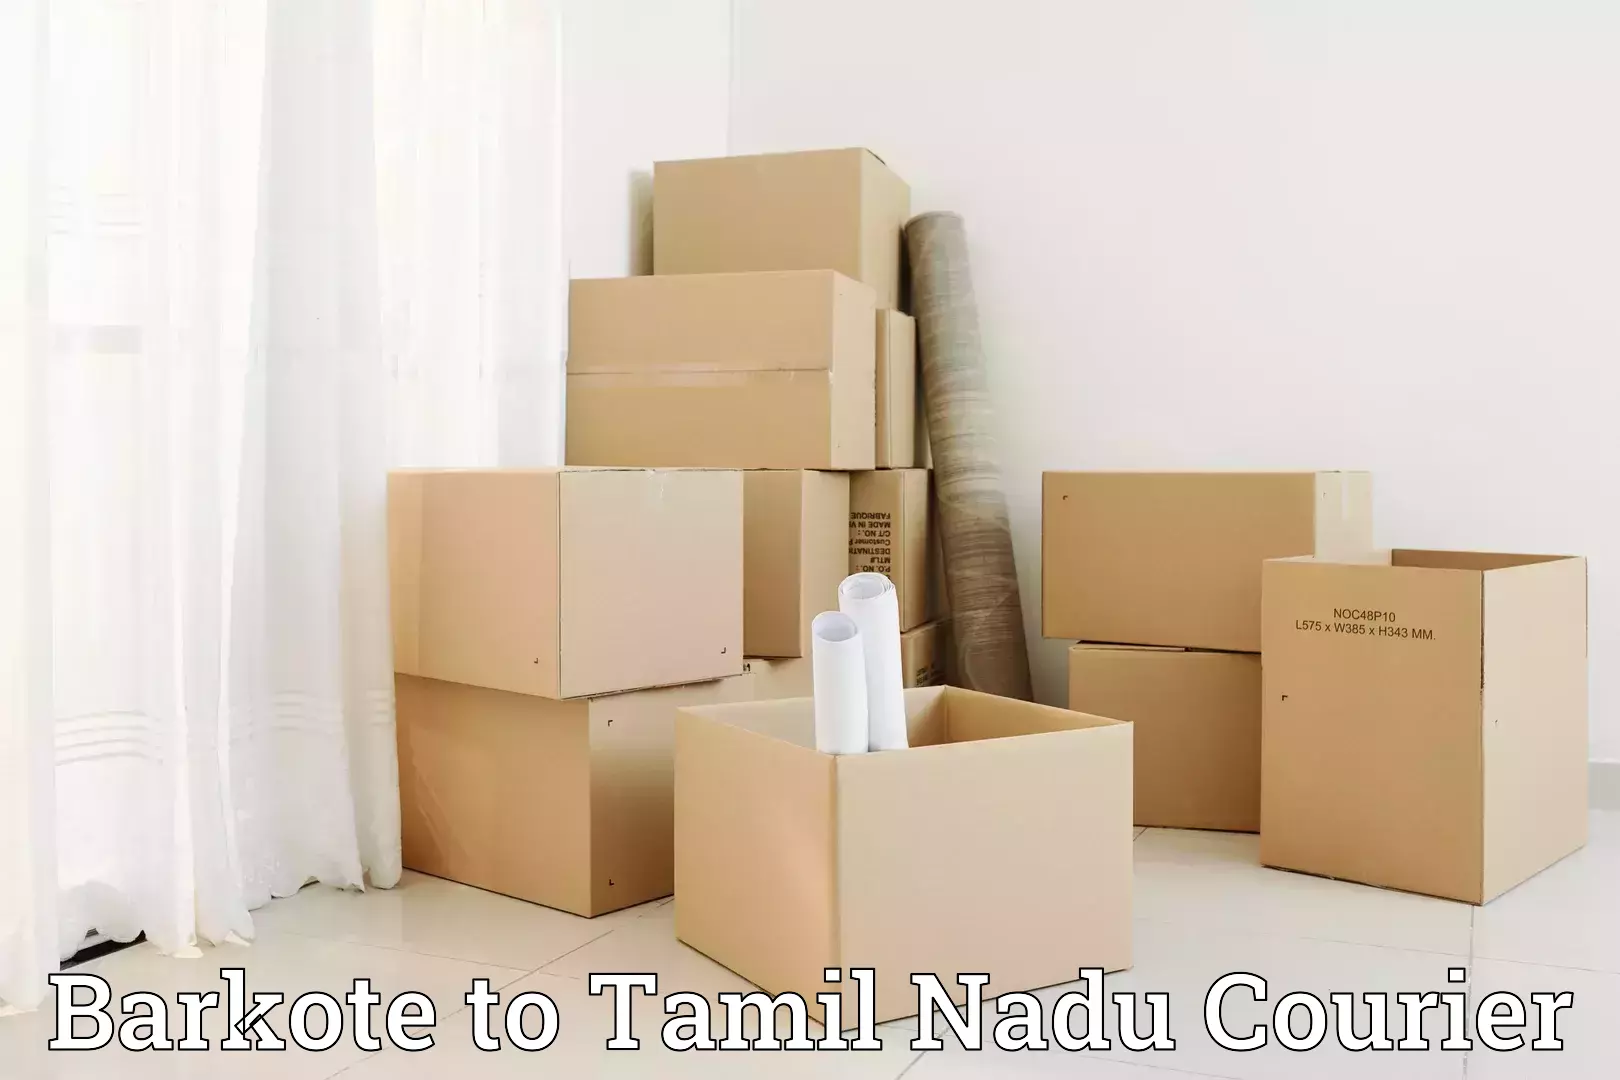 Quality relocation services in Barkote to Cumbum